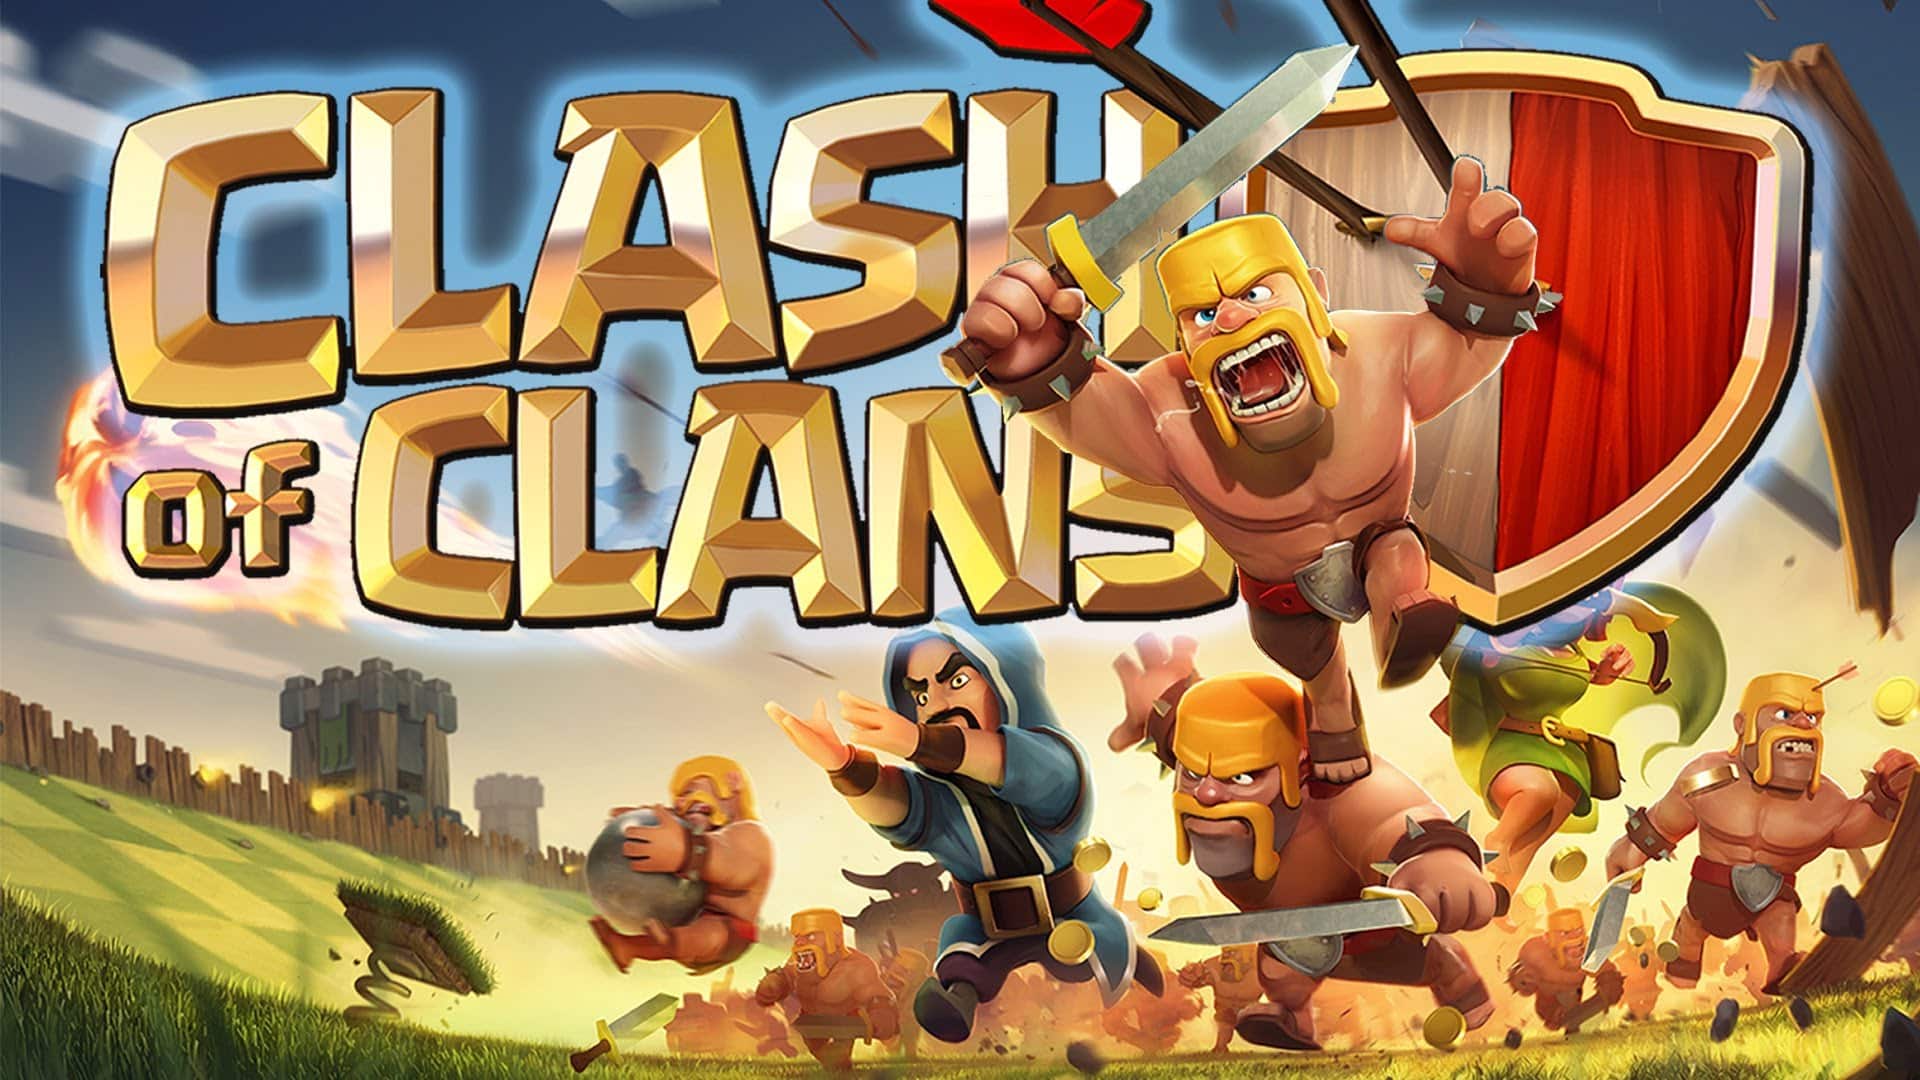 Top 10 Best Kept Secrets and Hints in Clash of Clans